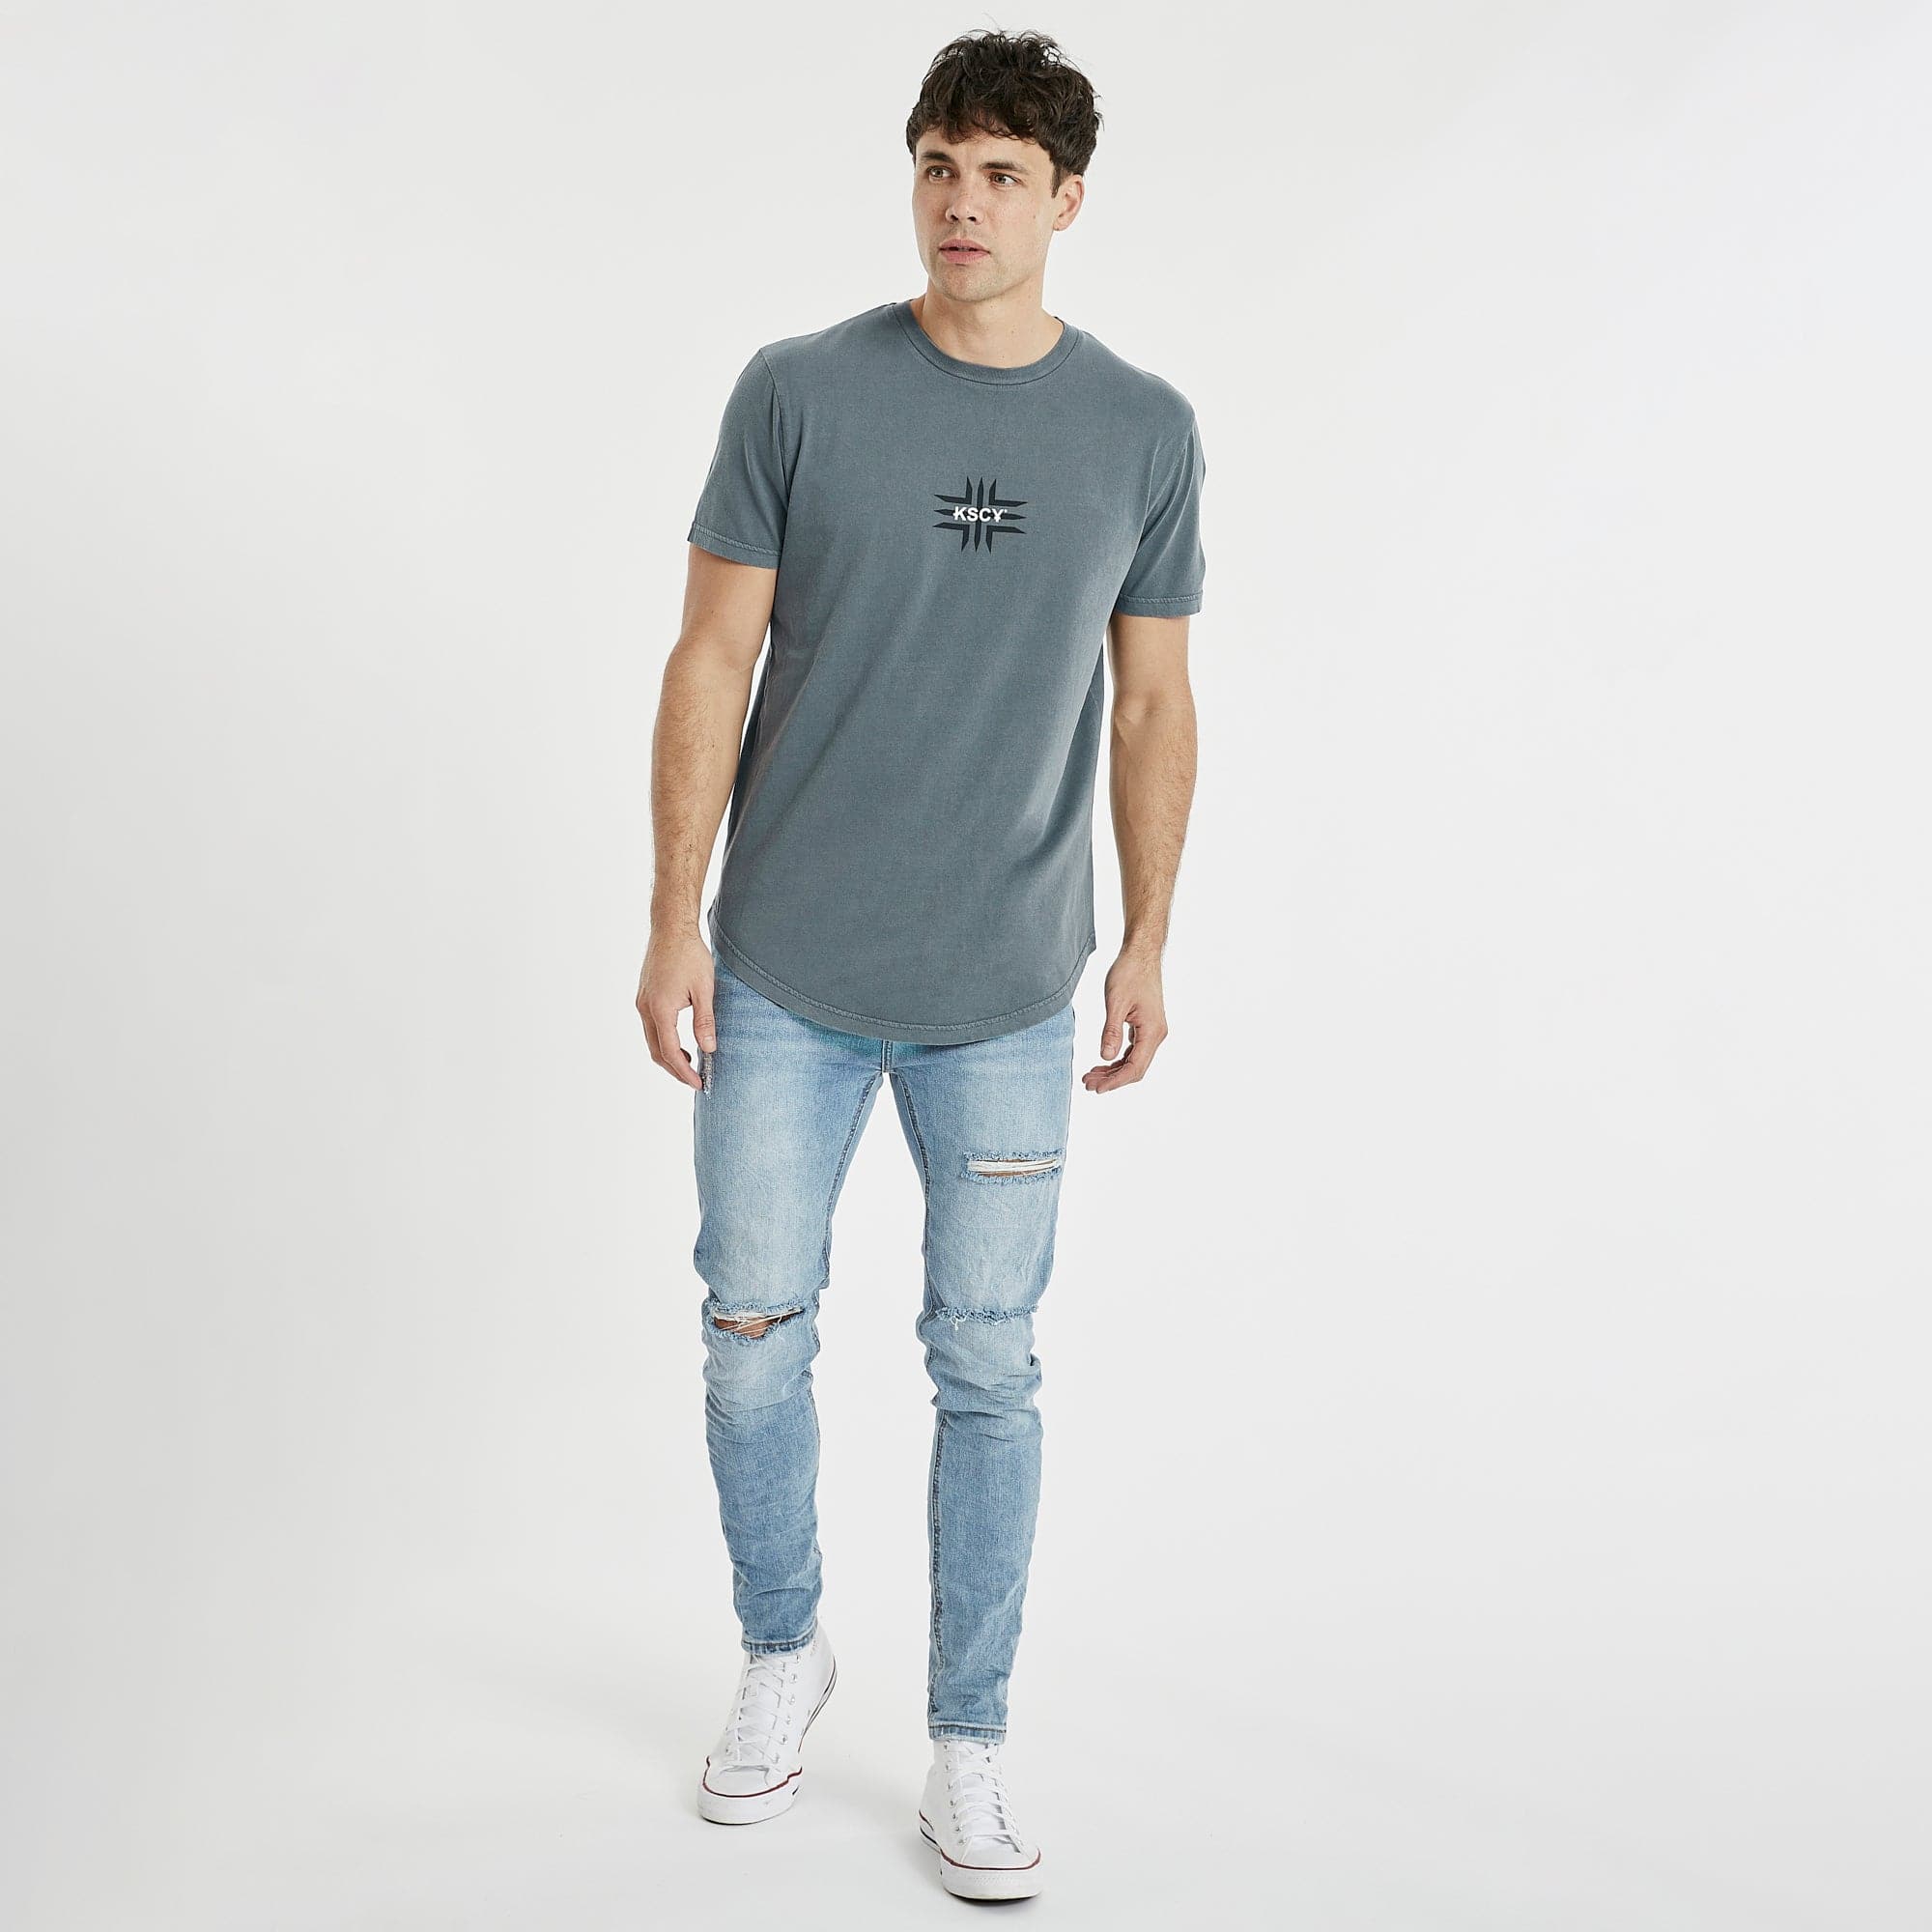 Paseo Dual Curved T-Shirt Pigment Carbon